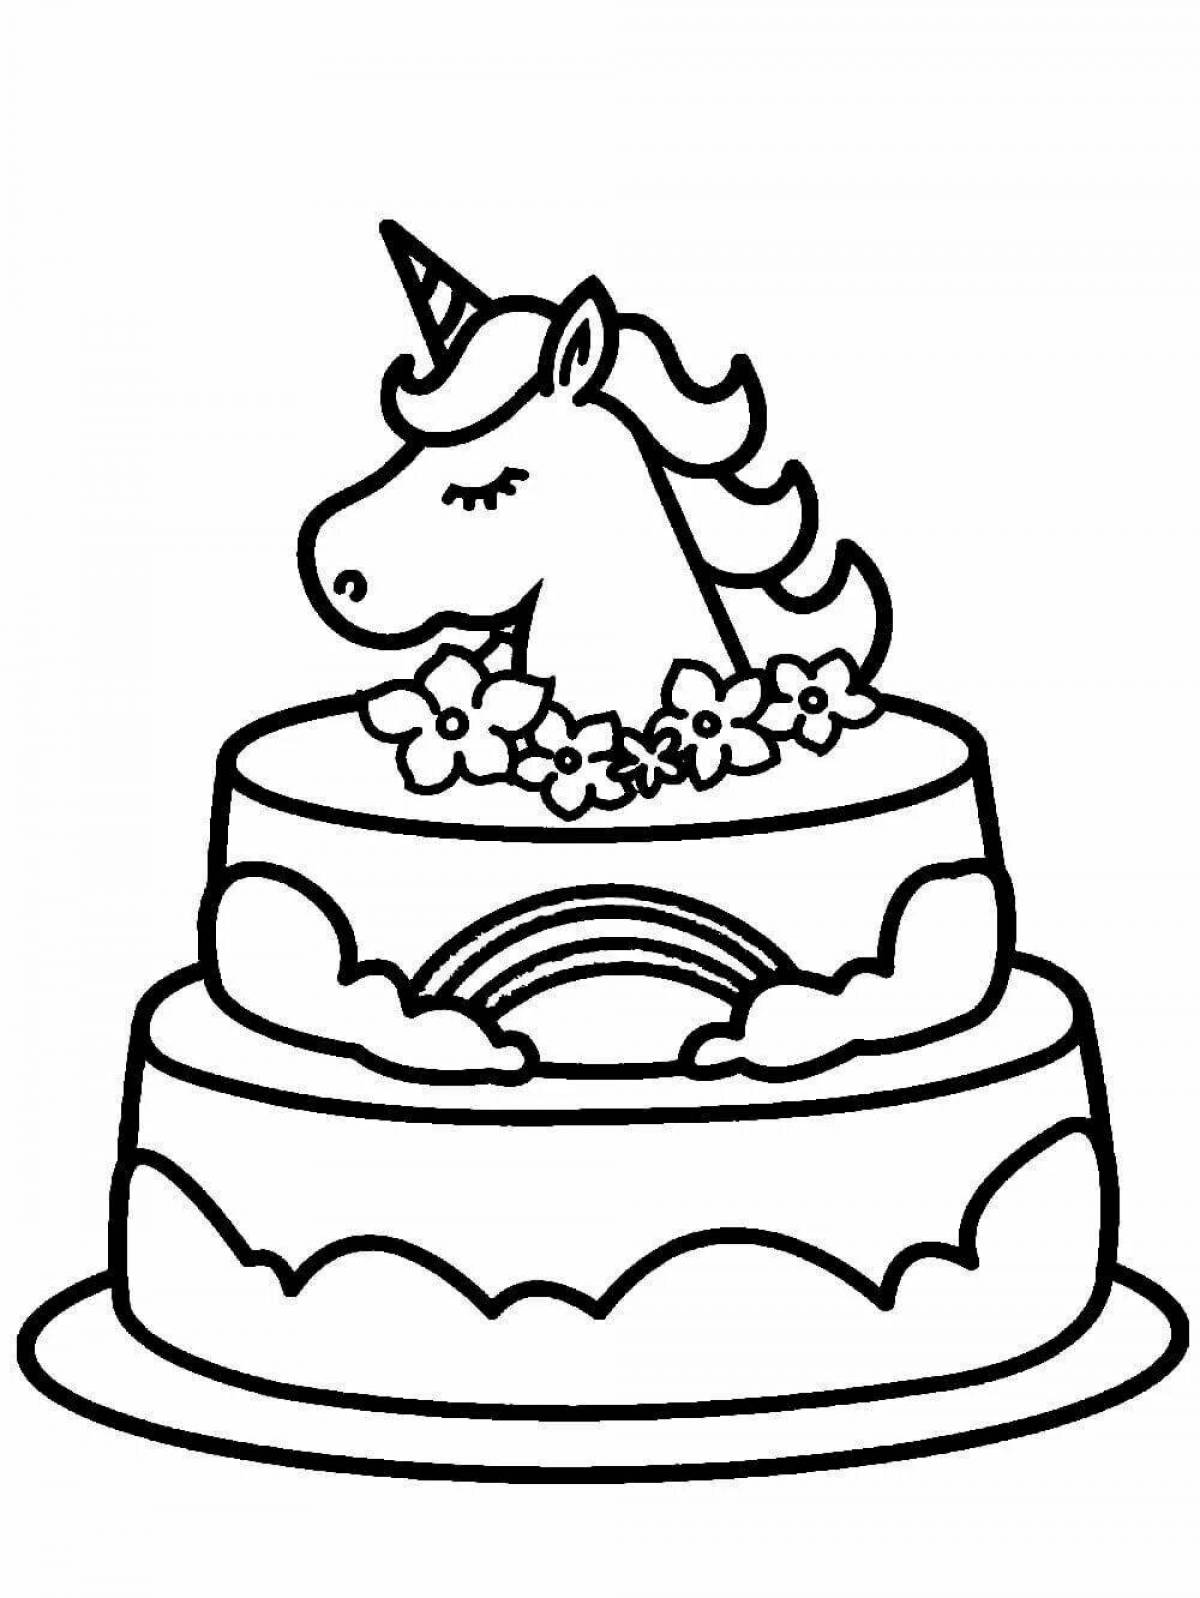 Glitter cake coloring book for kids